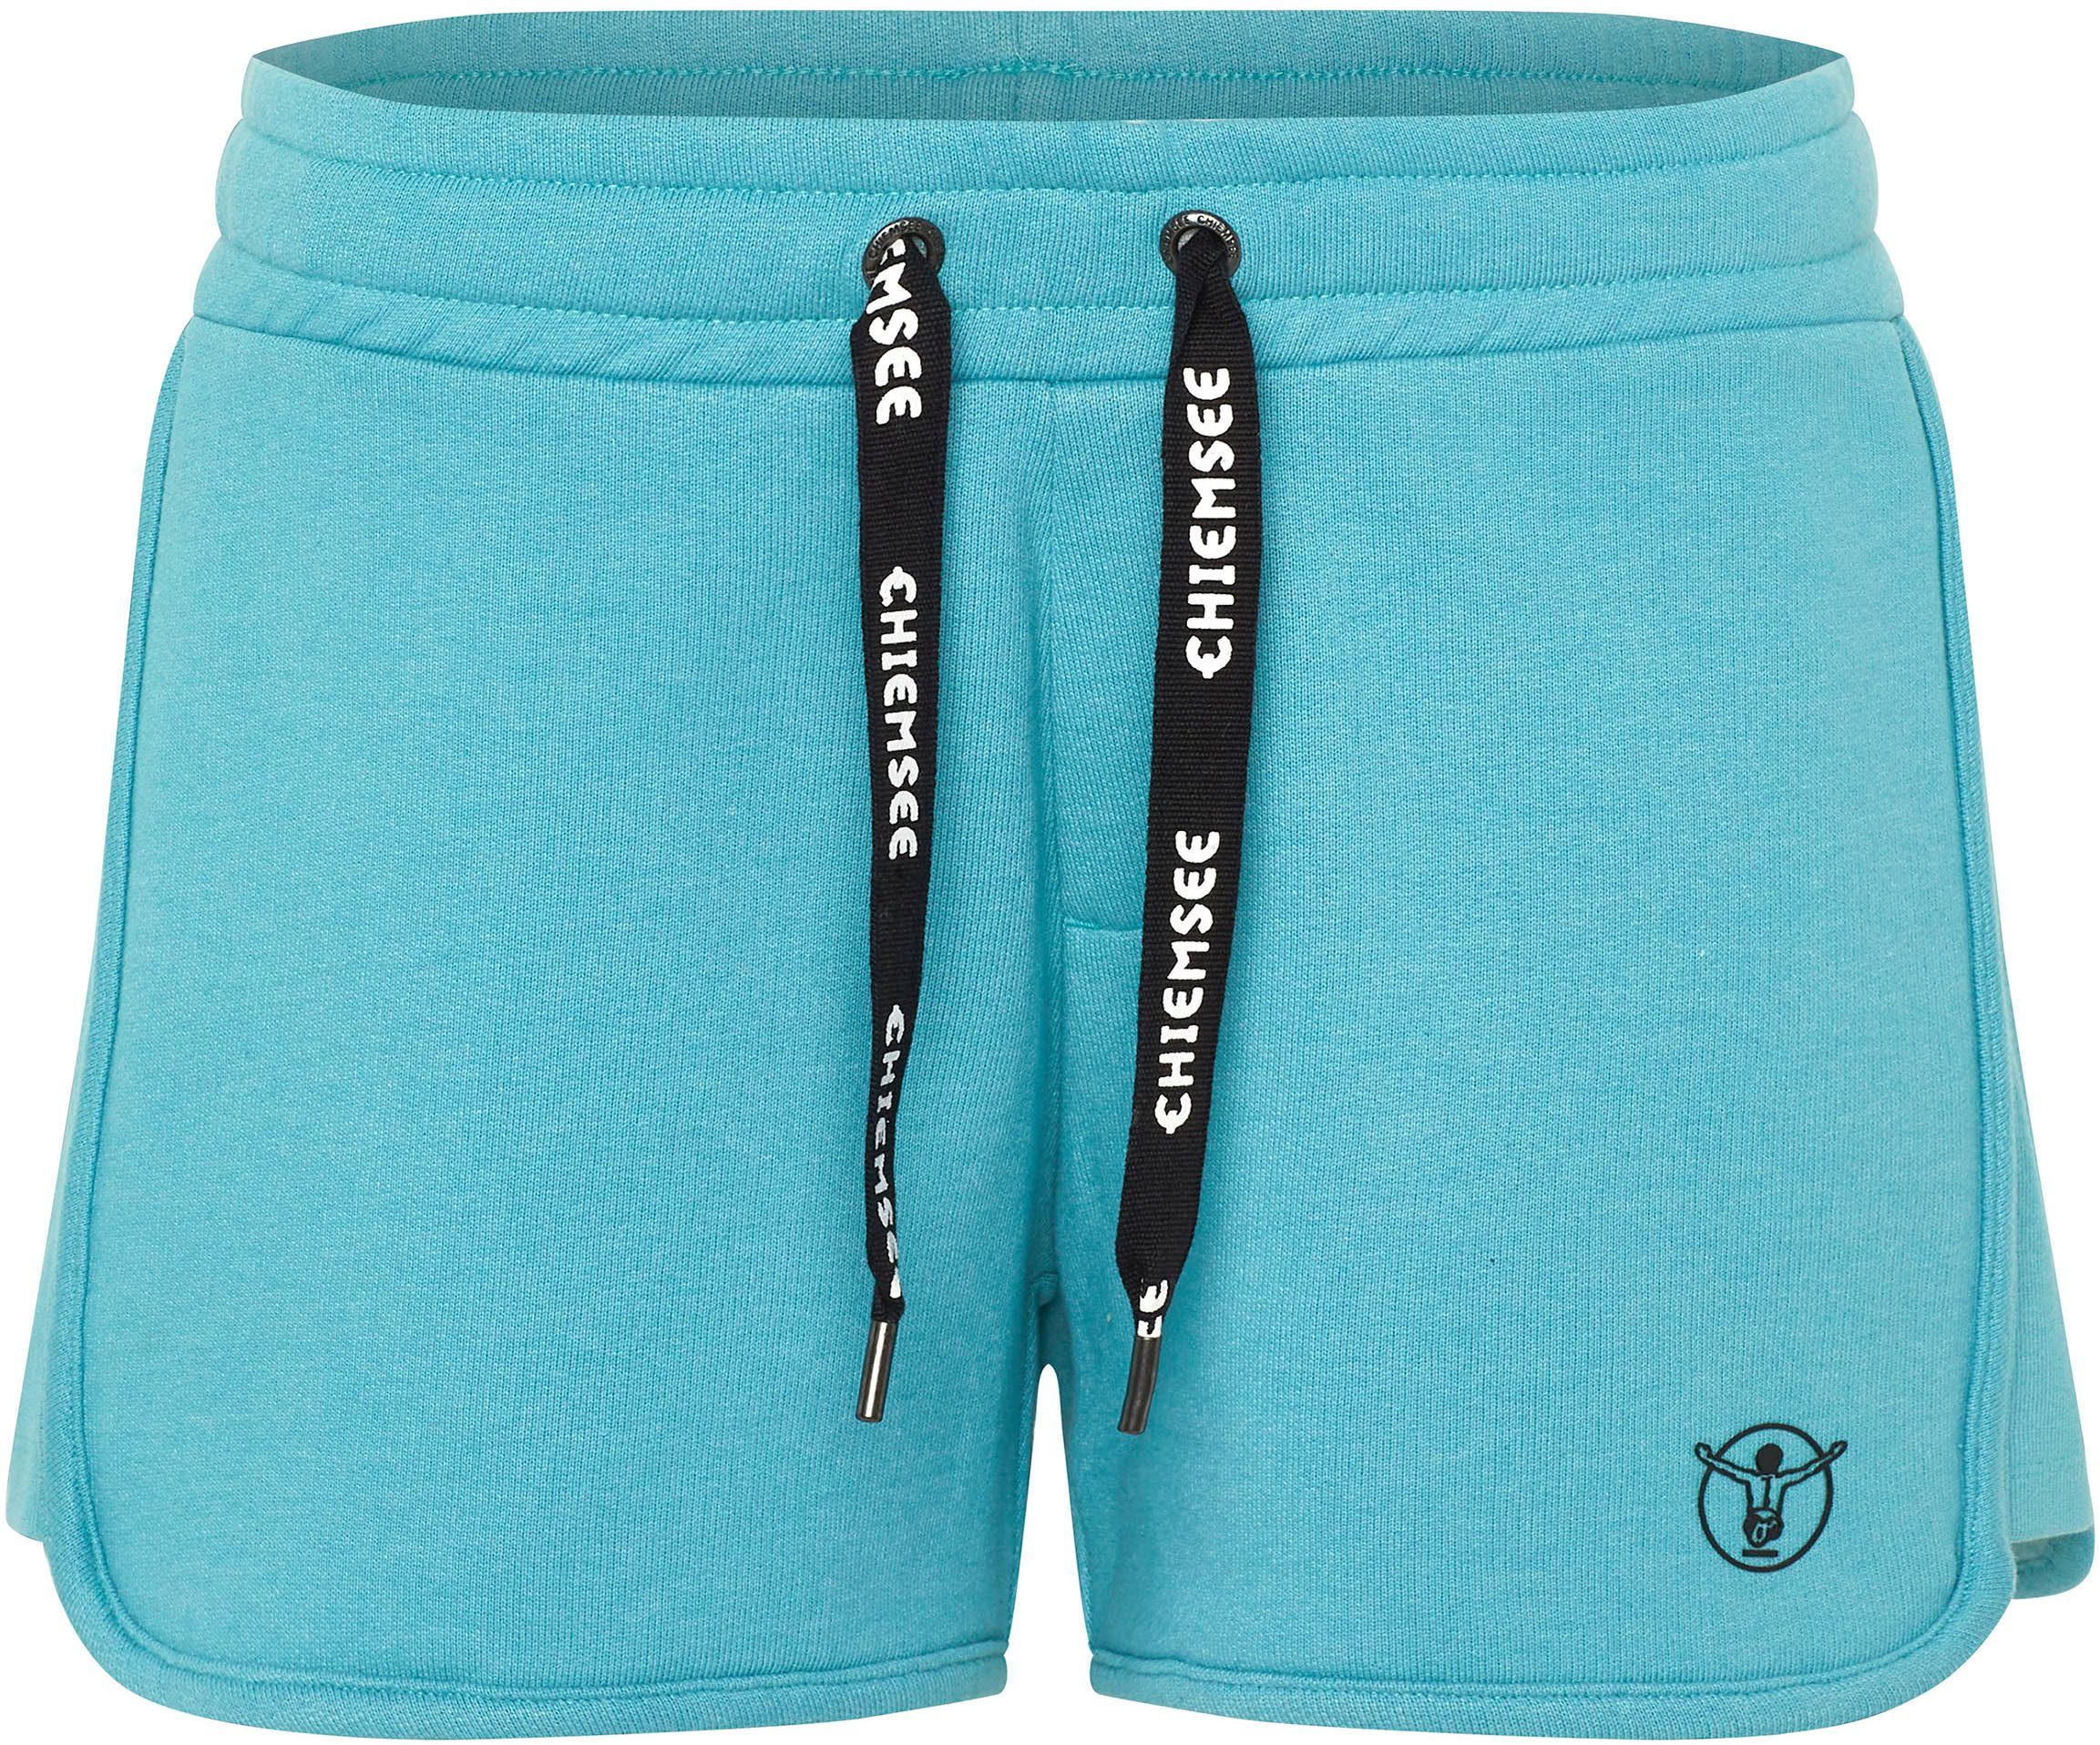 Chiemsee Shorts delphinblue